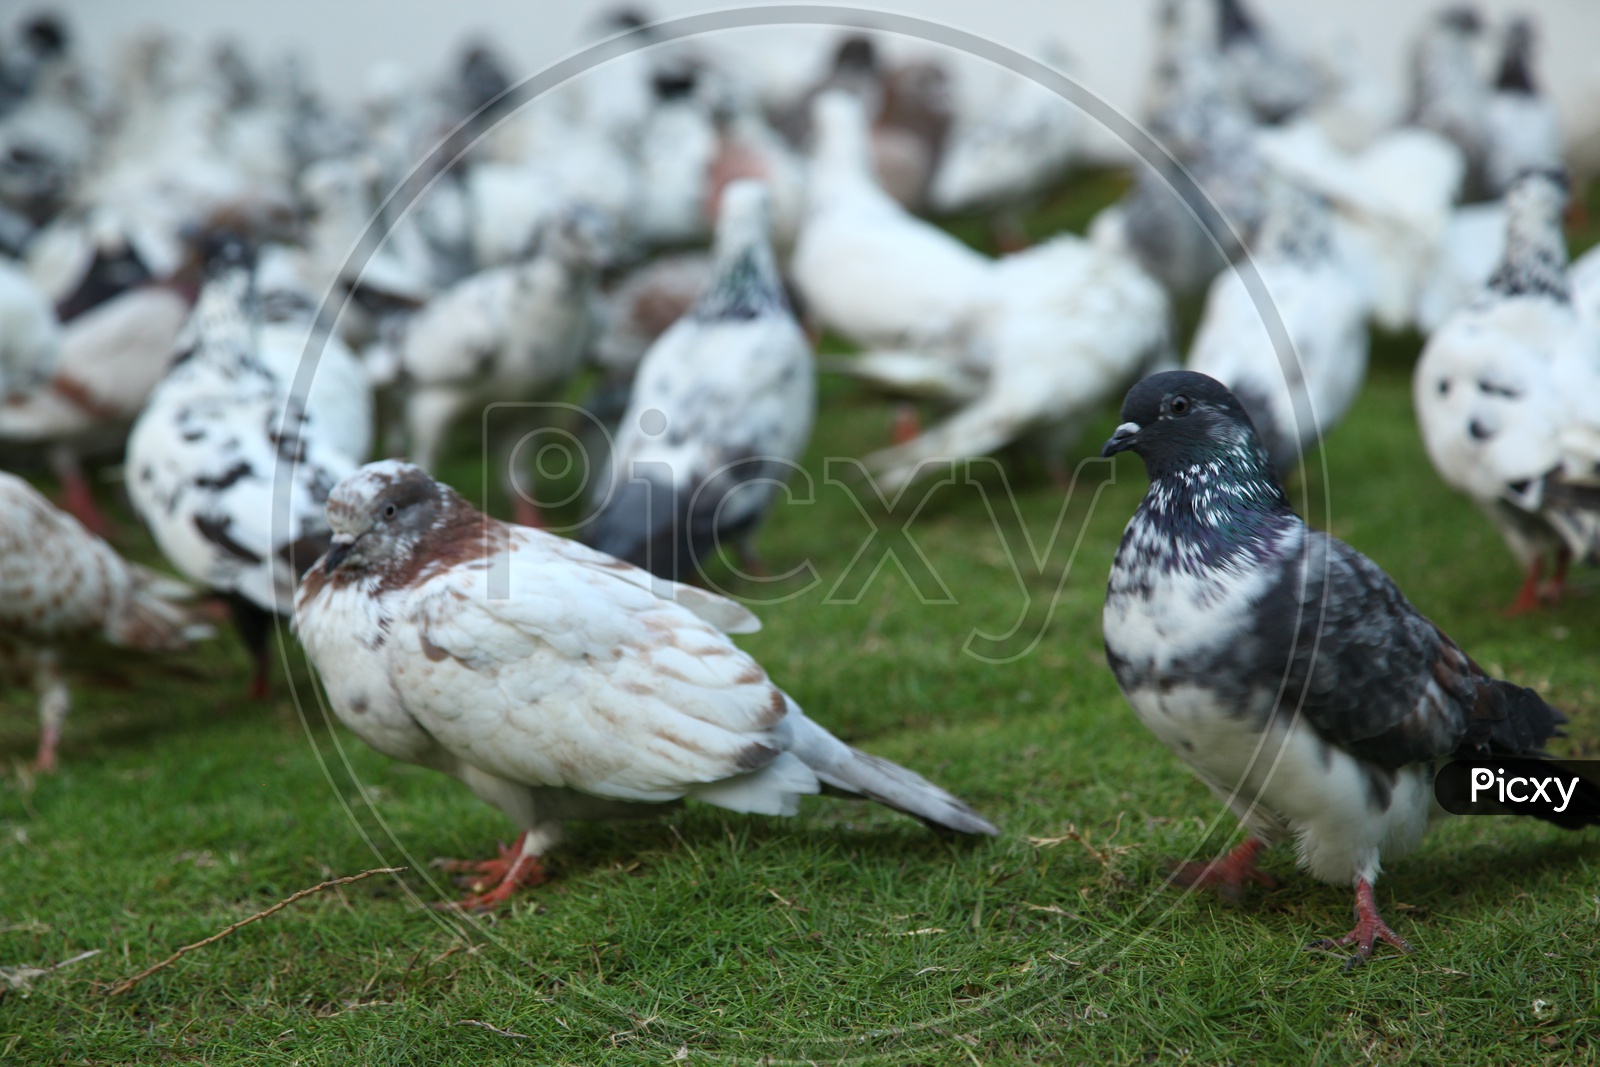 Two pigeons among the flock